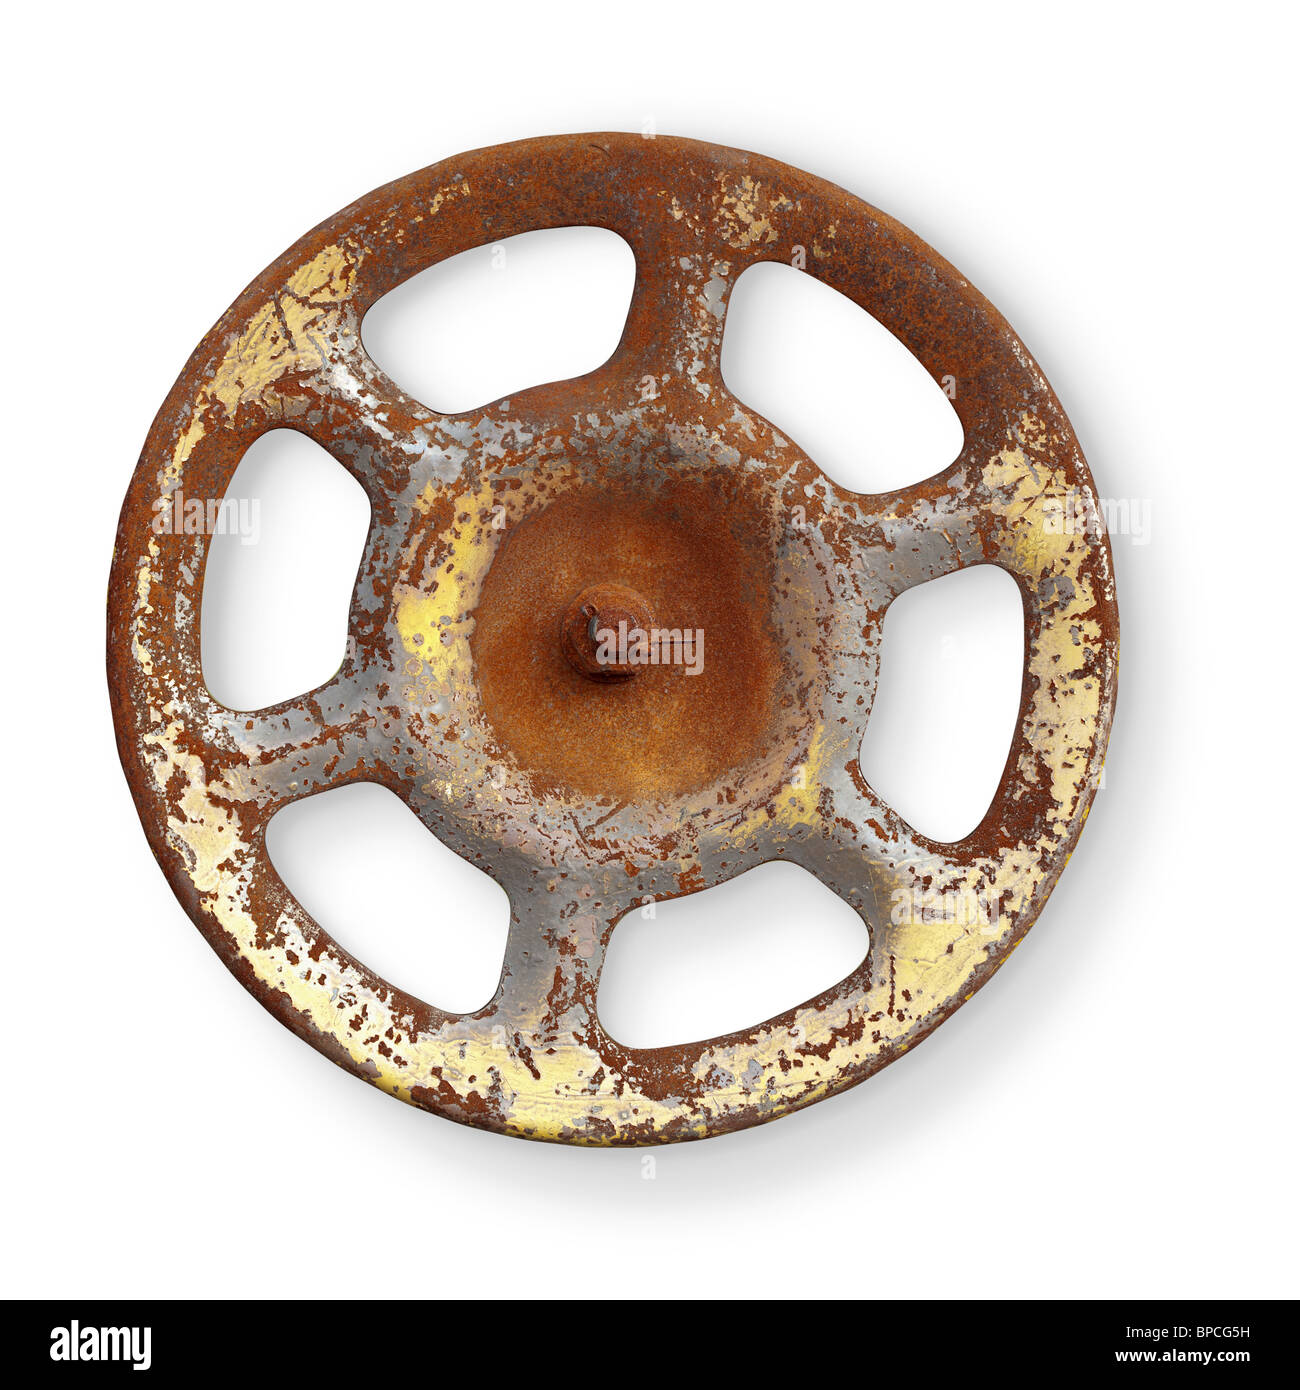 The old rusty metal valve, isolated on a white background Stock Photo